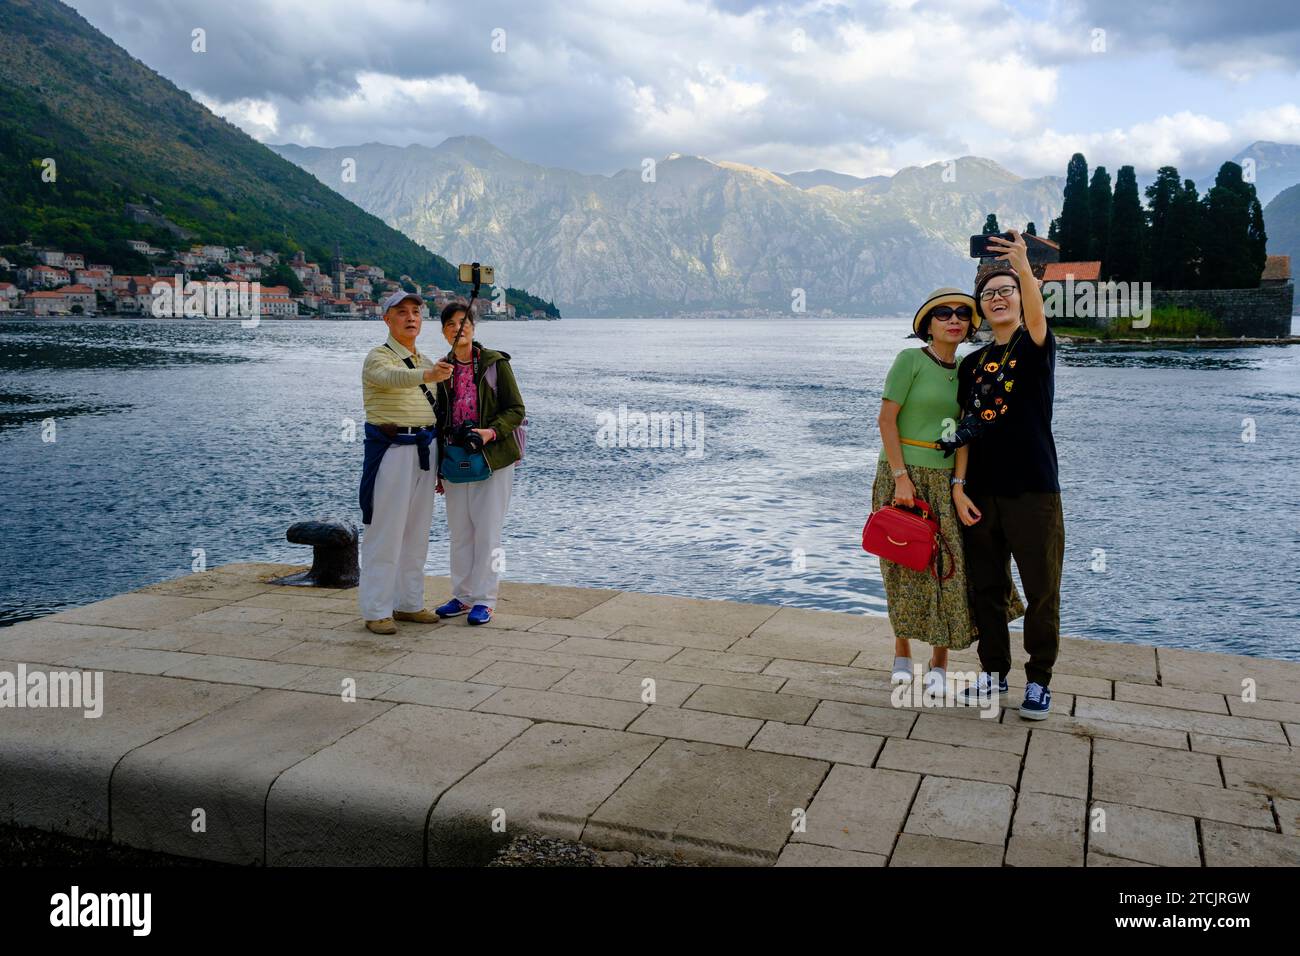 Tourists taking selfies on Our Lady of the Rocks Island, Bay of Kotor, near Perast, Montenegro Stock Photo